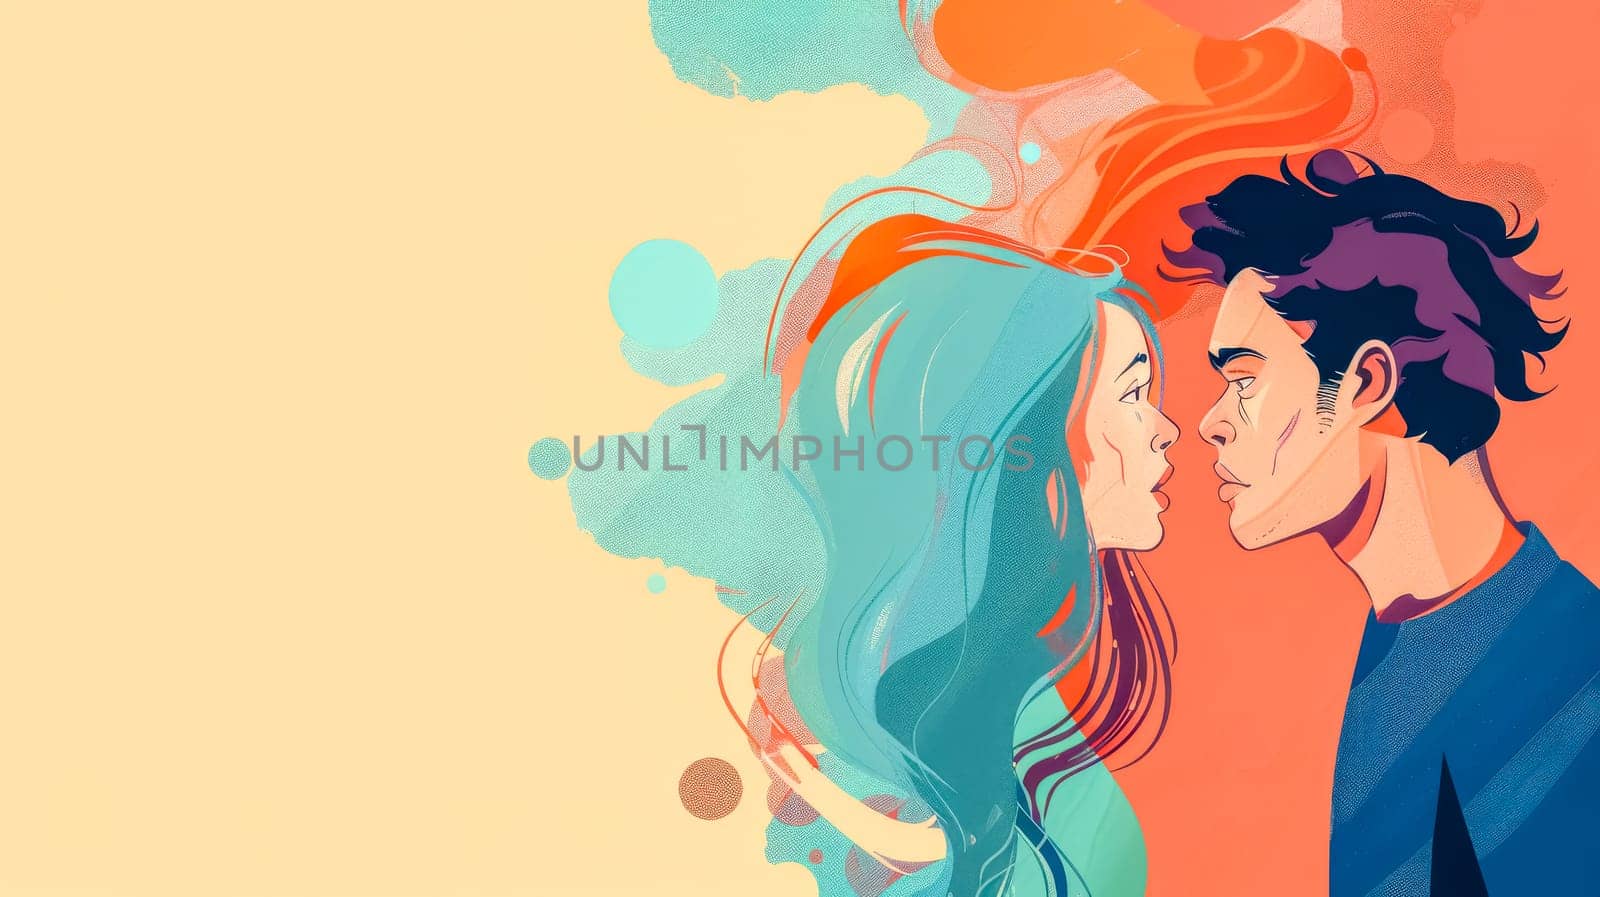 Illustration of a young couple close to a kiss, surrounded by vibrant colors